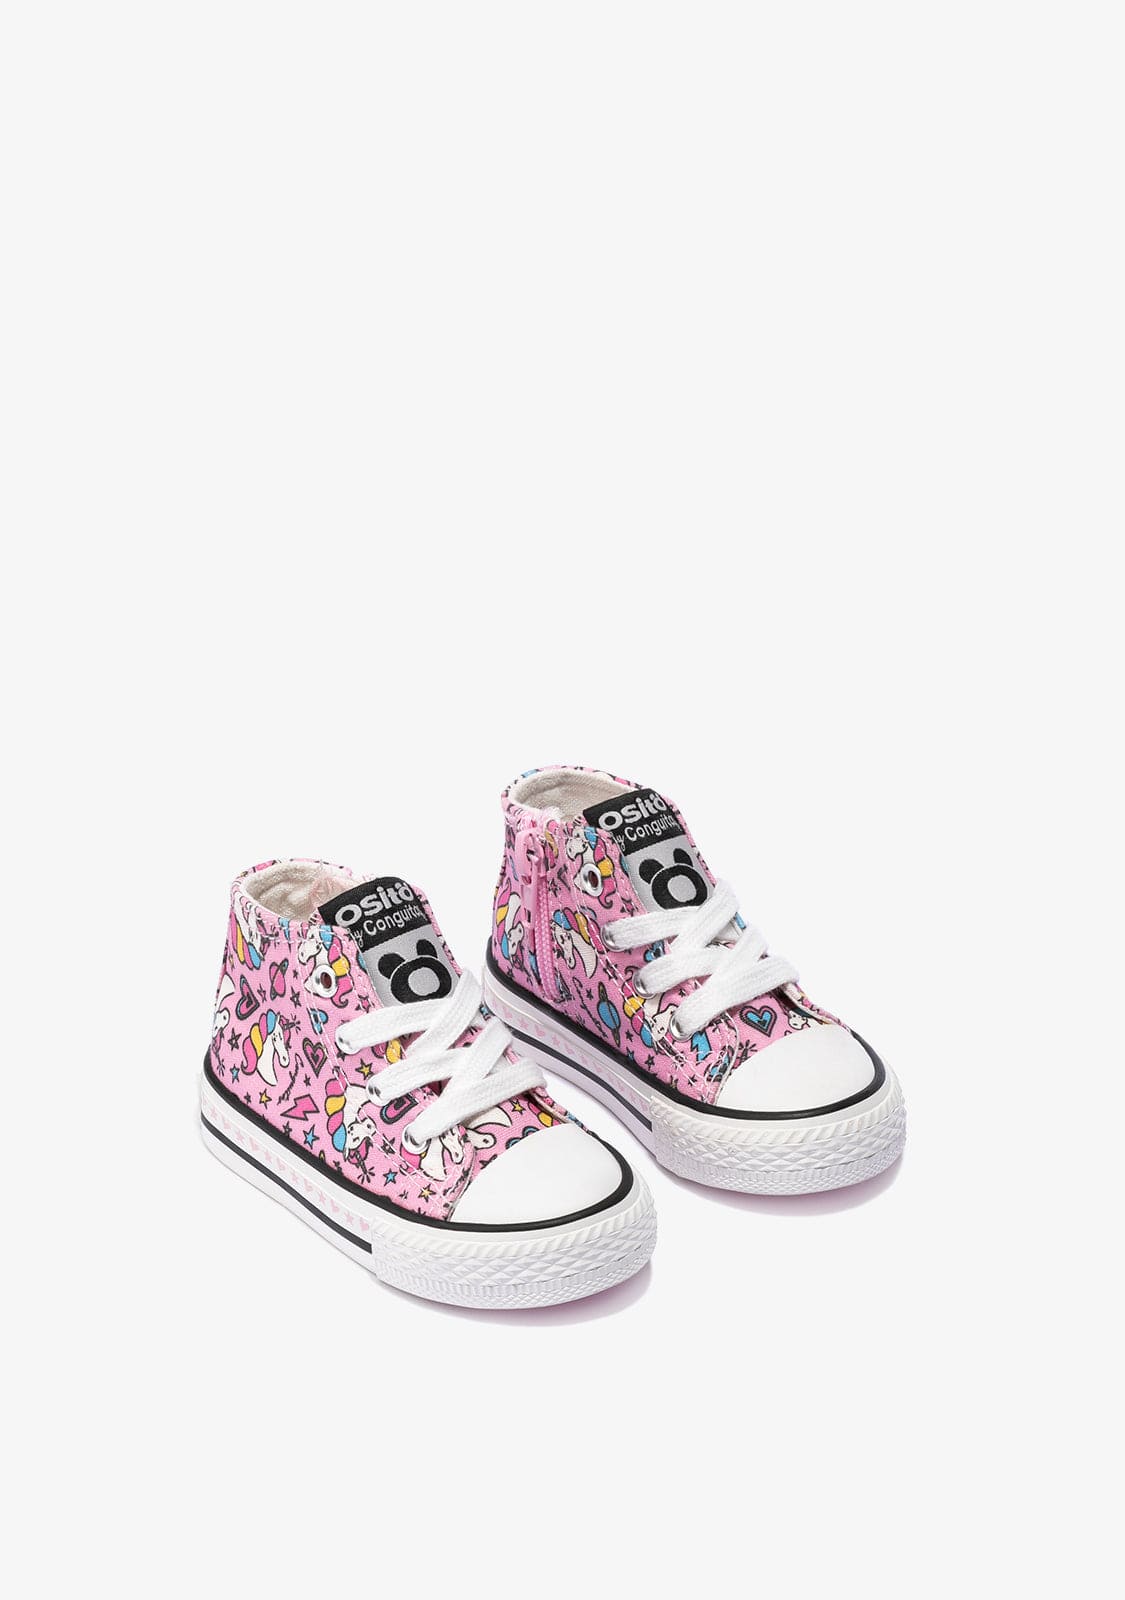 OSITO Shoes Baby's Pink Unicorn Hi-Top Sneakers Canvas